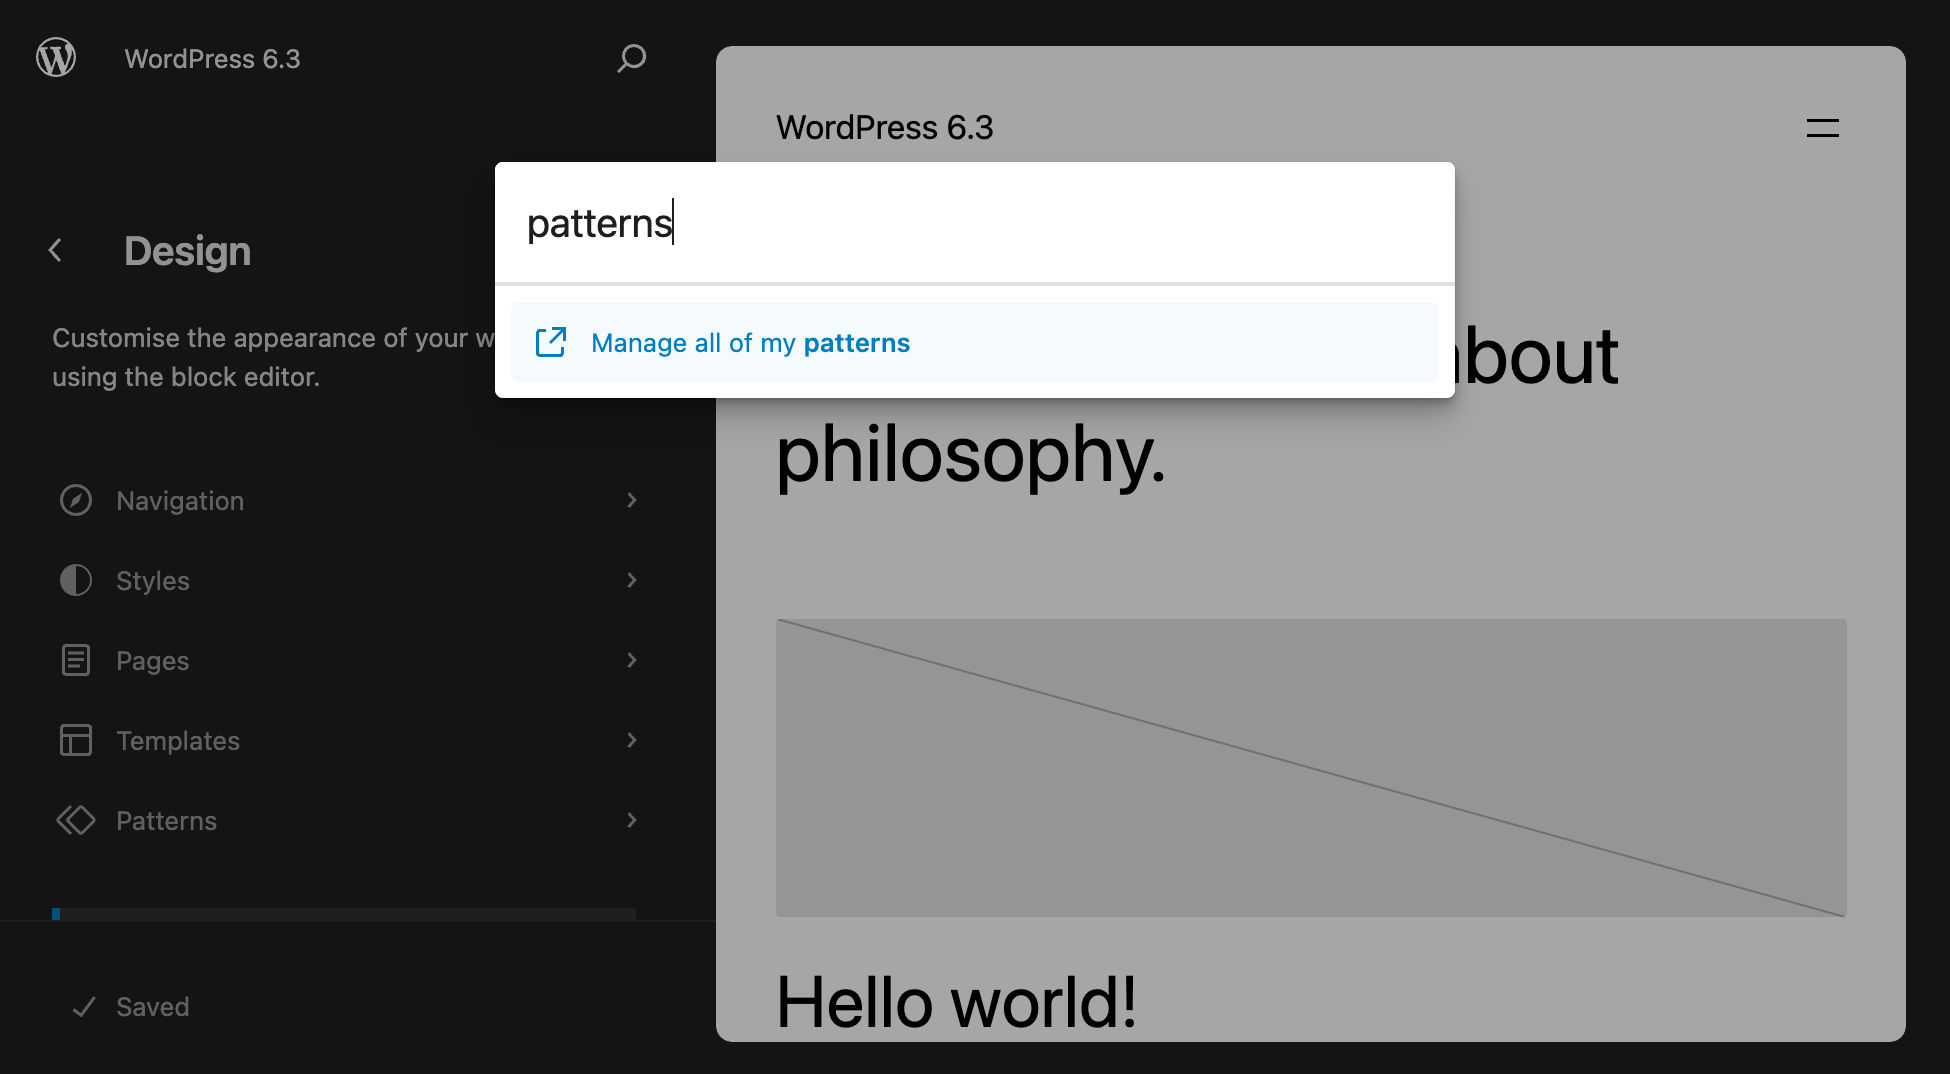 Searching for patterns in WordPress 6.3